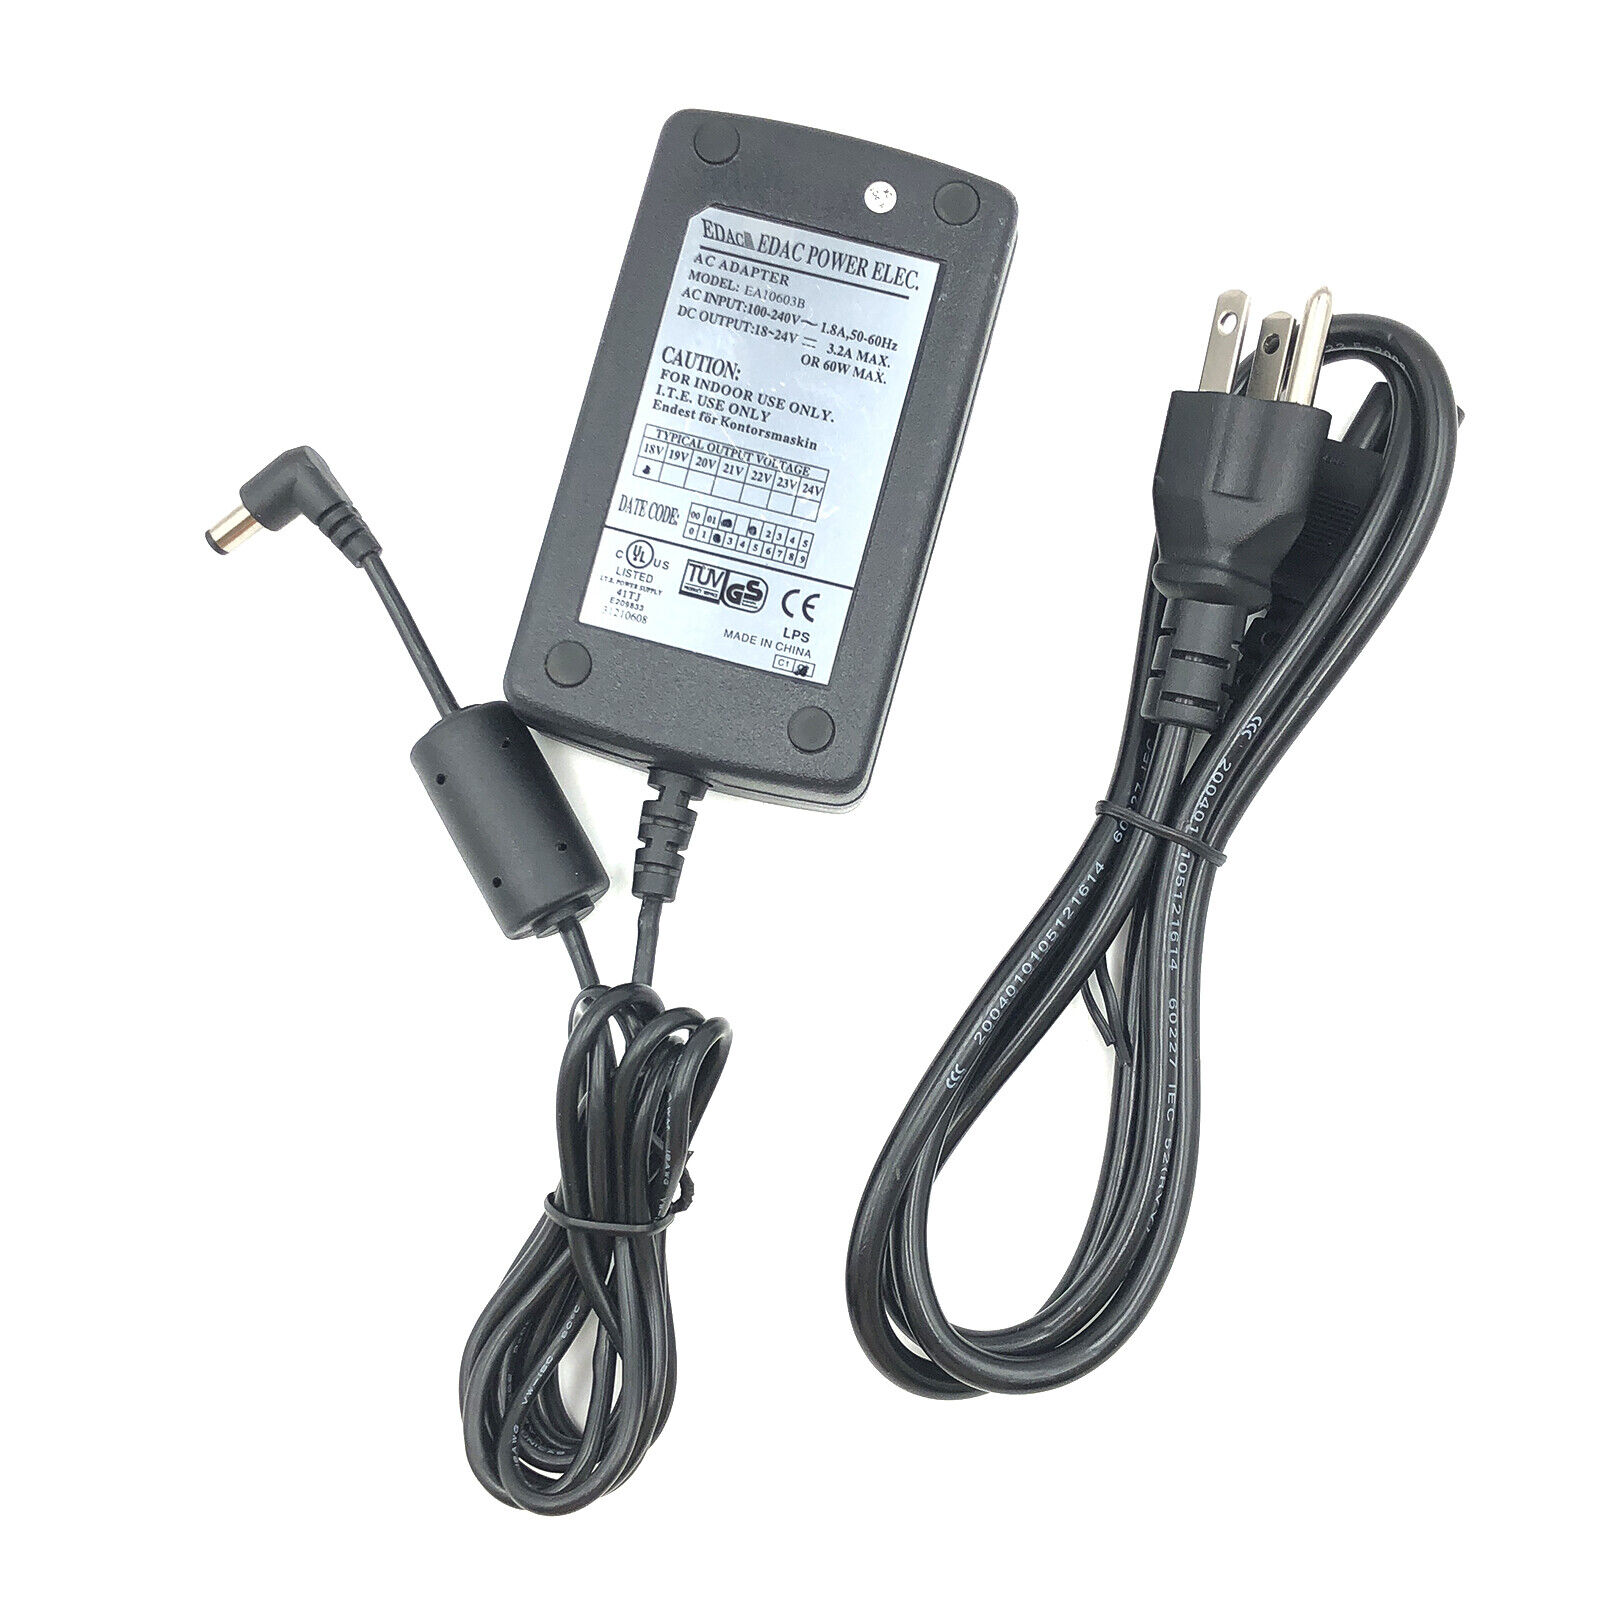 OEM Edac AC/DC Adapter for JBL Extreme-Series Portable Bluetooth Speaker w/Cord Brand JBL Type Adapter Connection Split